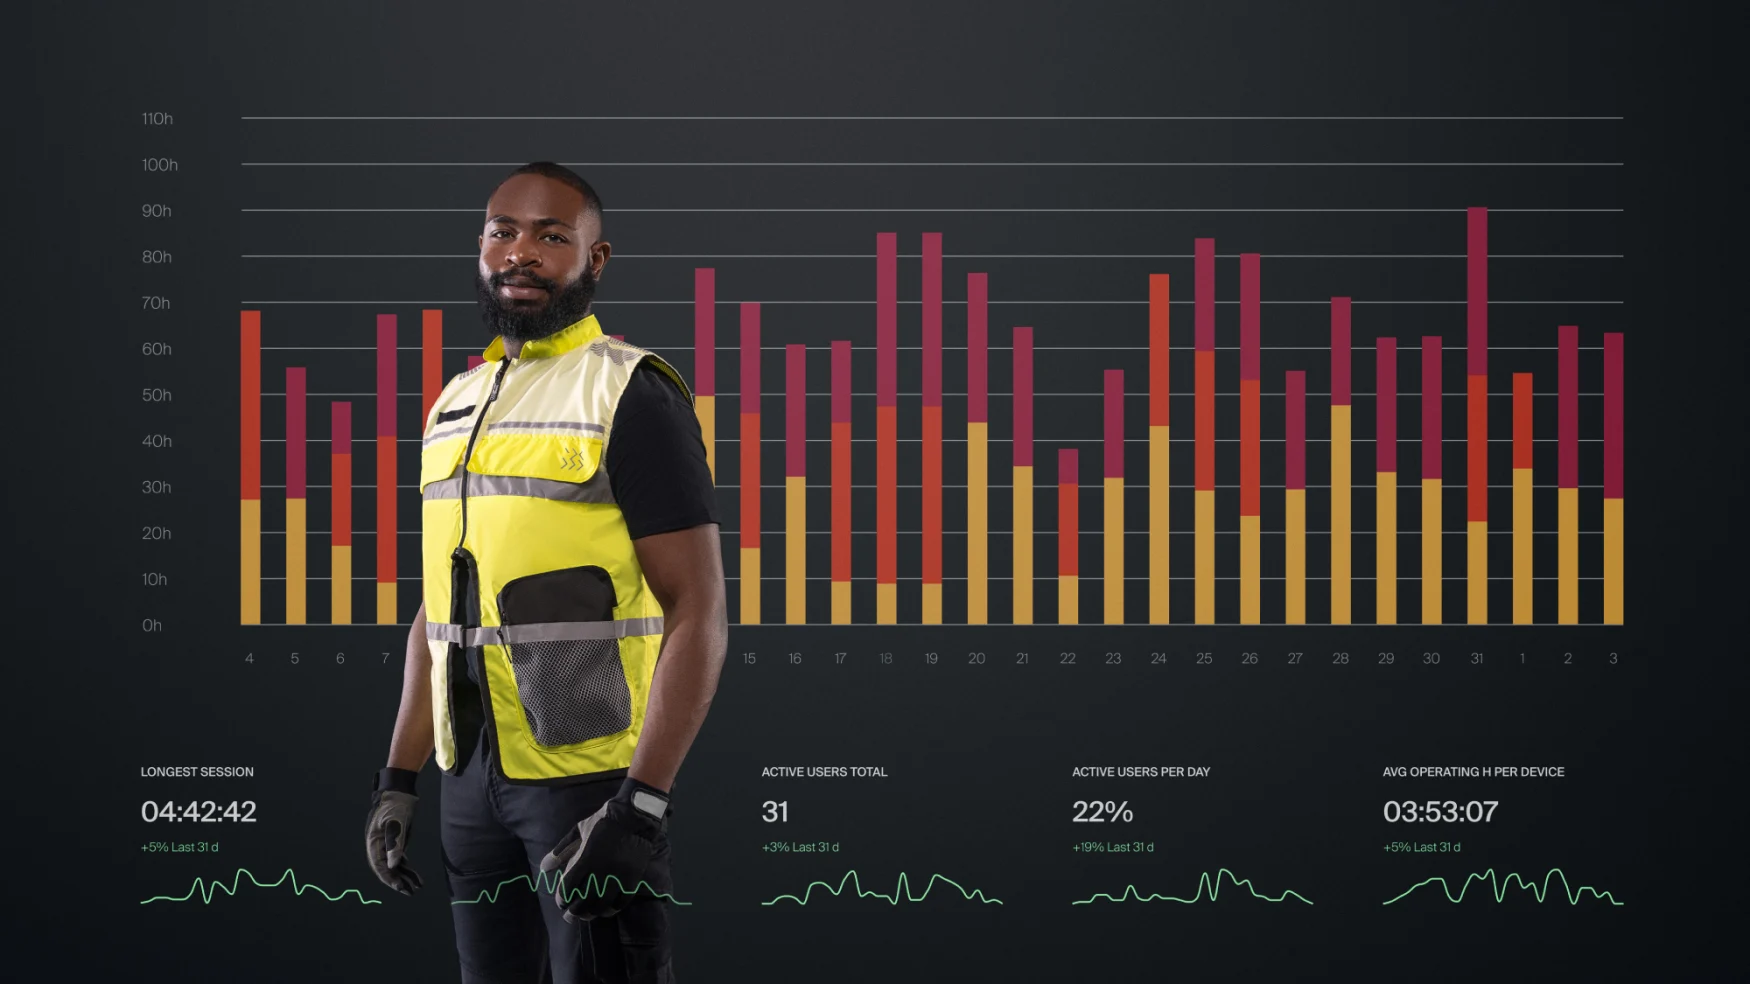 German Bionic Apogee and/or SafetyVest. The brace one has a woman wearing it while picking a large box out of a wire bin, the vest one is just a guy wearing it and looking directly into camera and there are a bunch more of the cgi line graphs and bar charts and stuff. I don't get this aesthetic at all. The equipment's cool though.